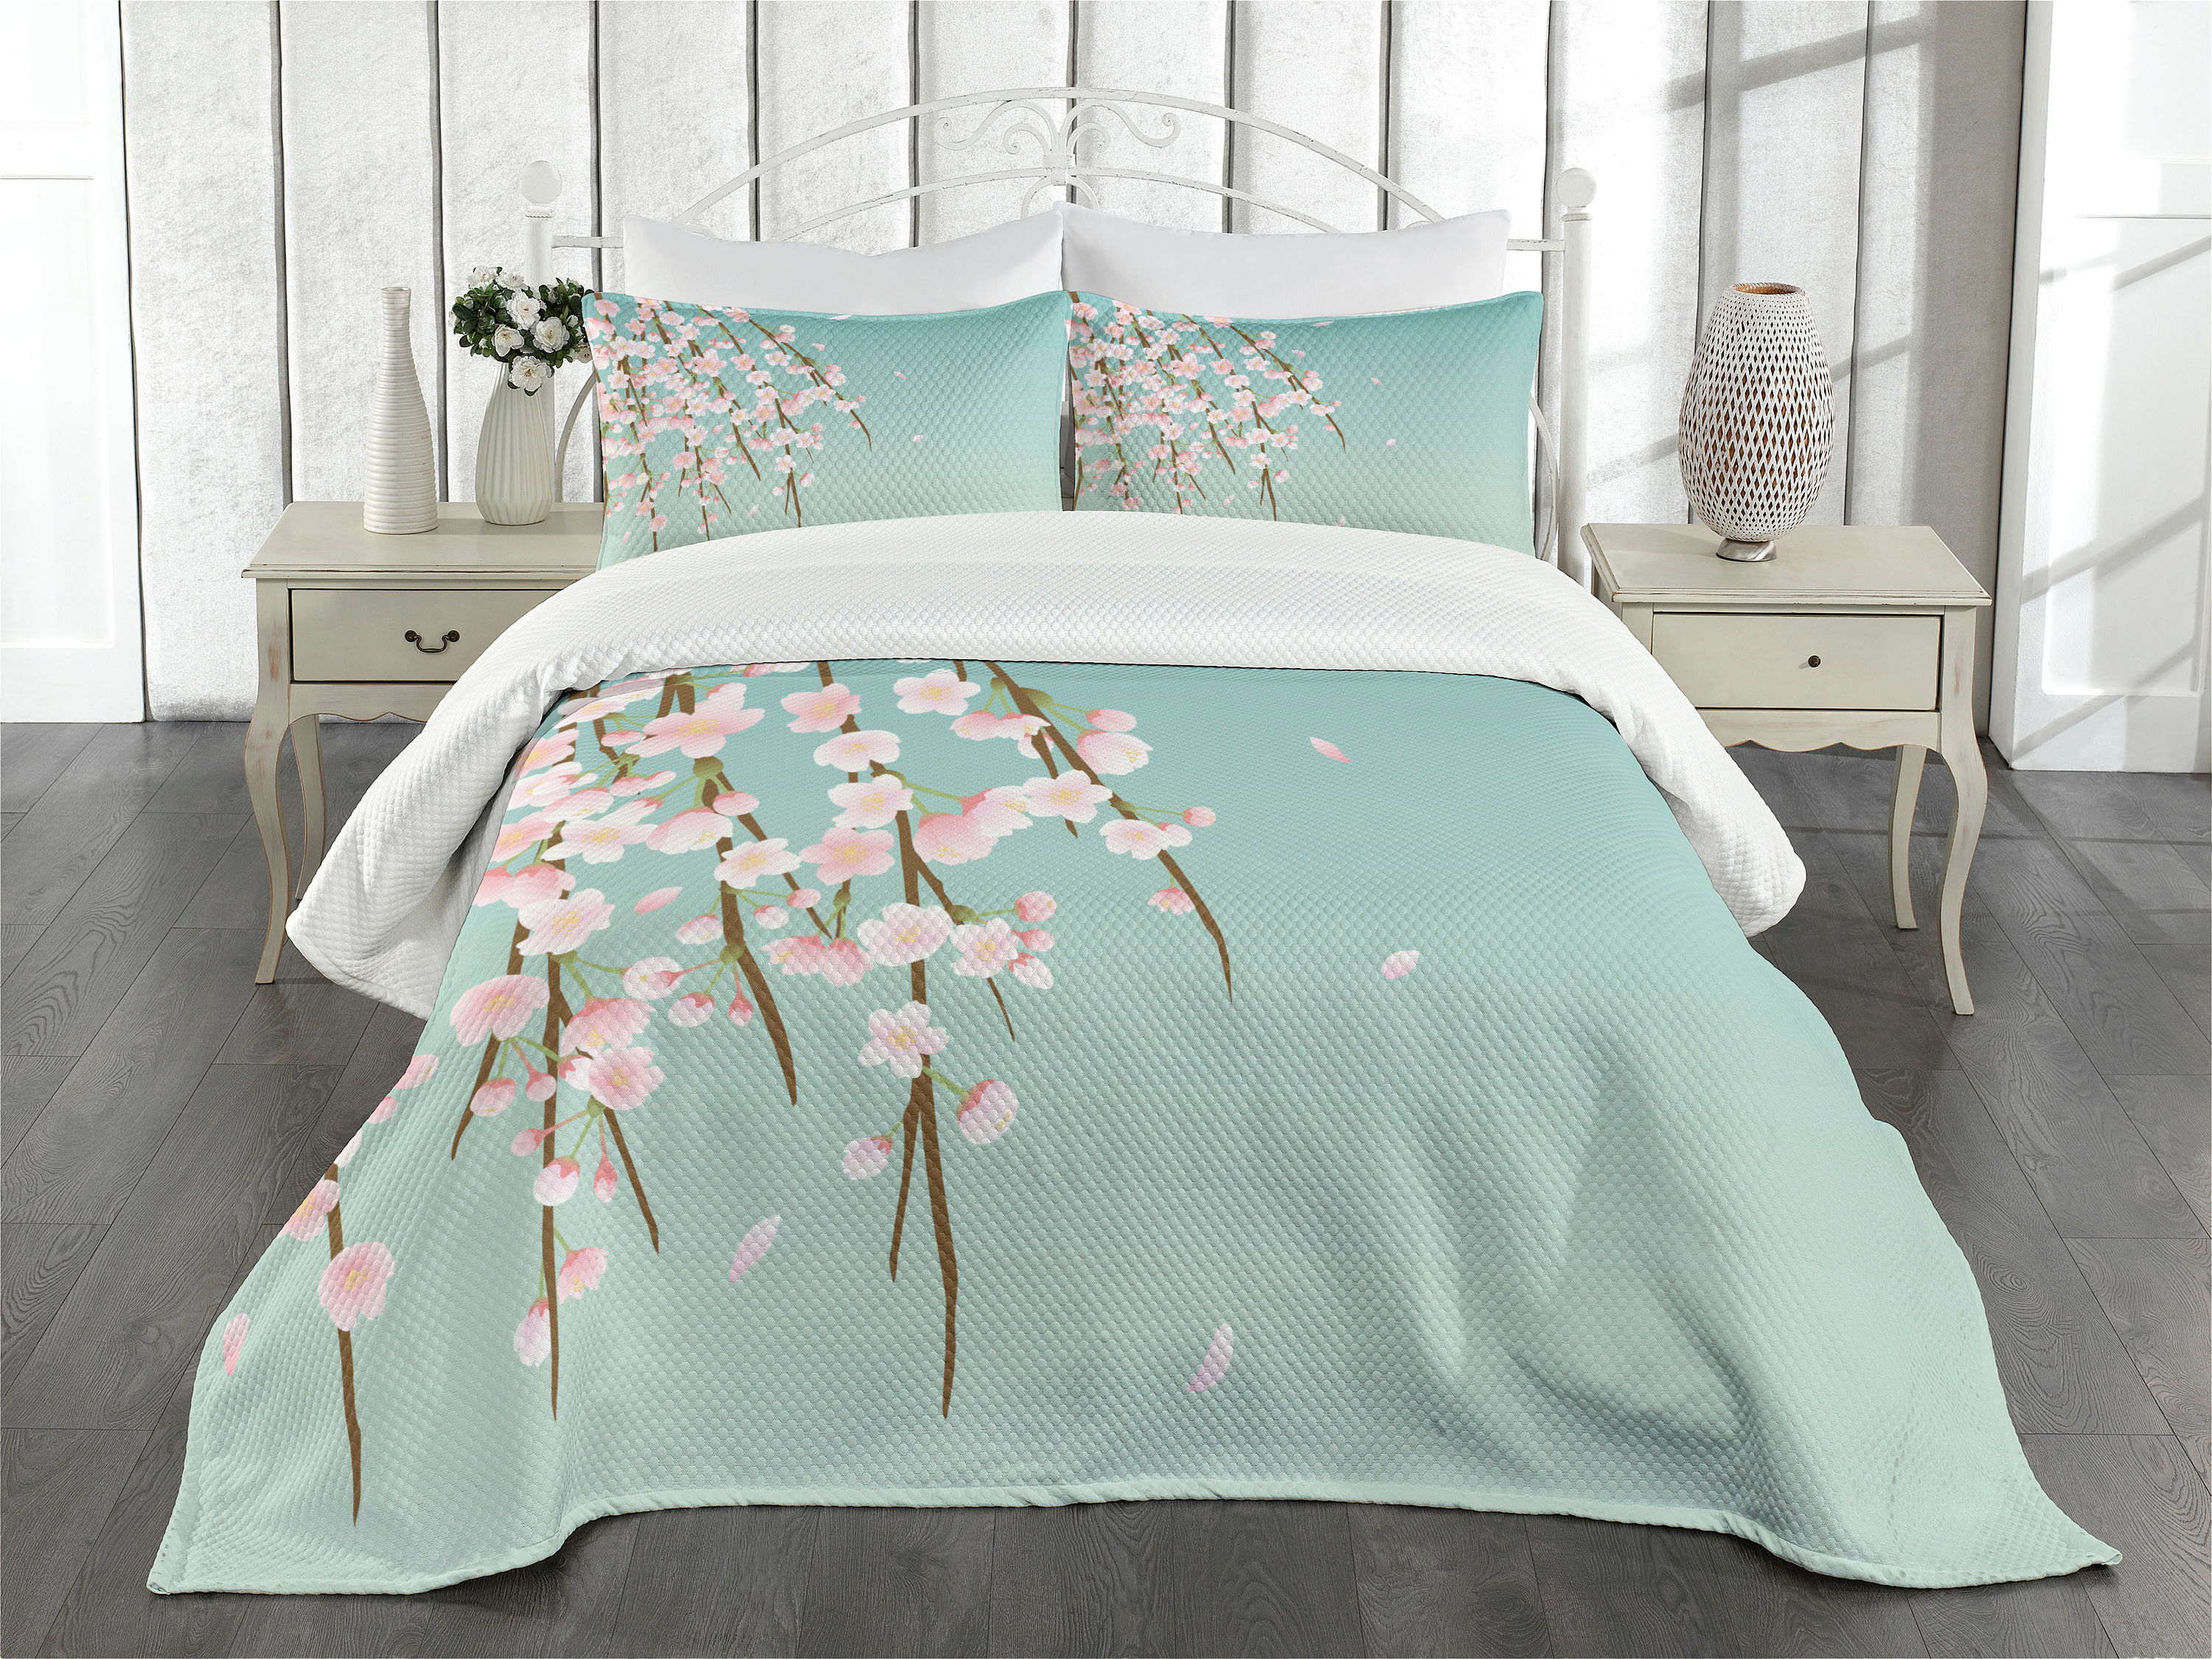 Weeping Flower Bedspread Set King Size, Freshly Blooming Cherry Blossom Branches with Flower Buds, Quilted 3 Piece Decor Coverlet Set with 2 Pillow Shams, Pale Pink Baby Blue Taupe, by Ambesonne - image 1 of 5